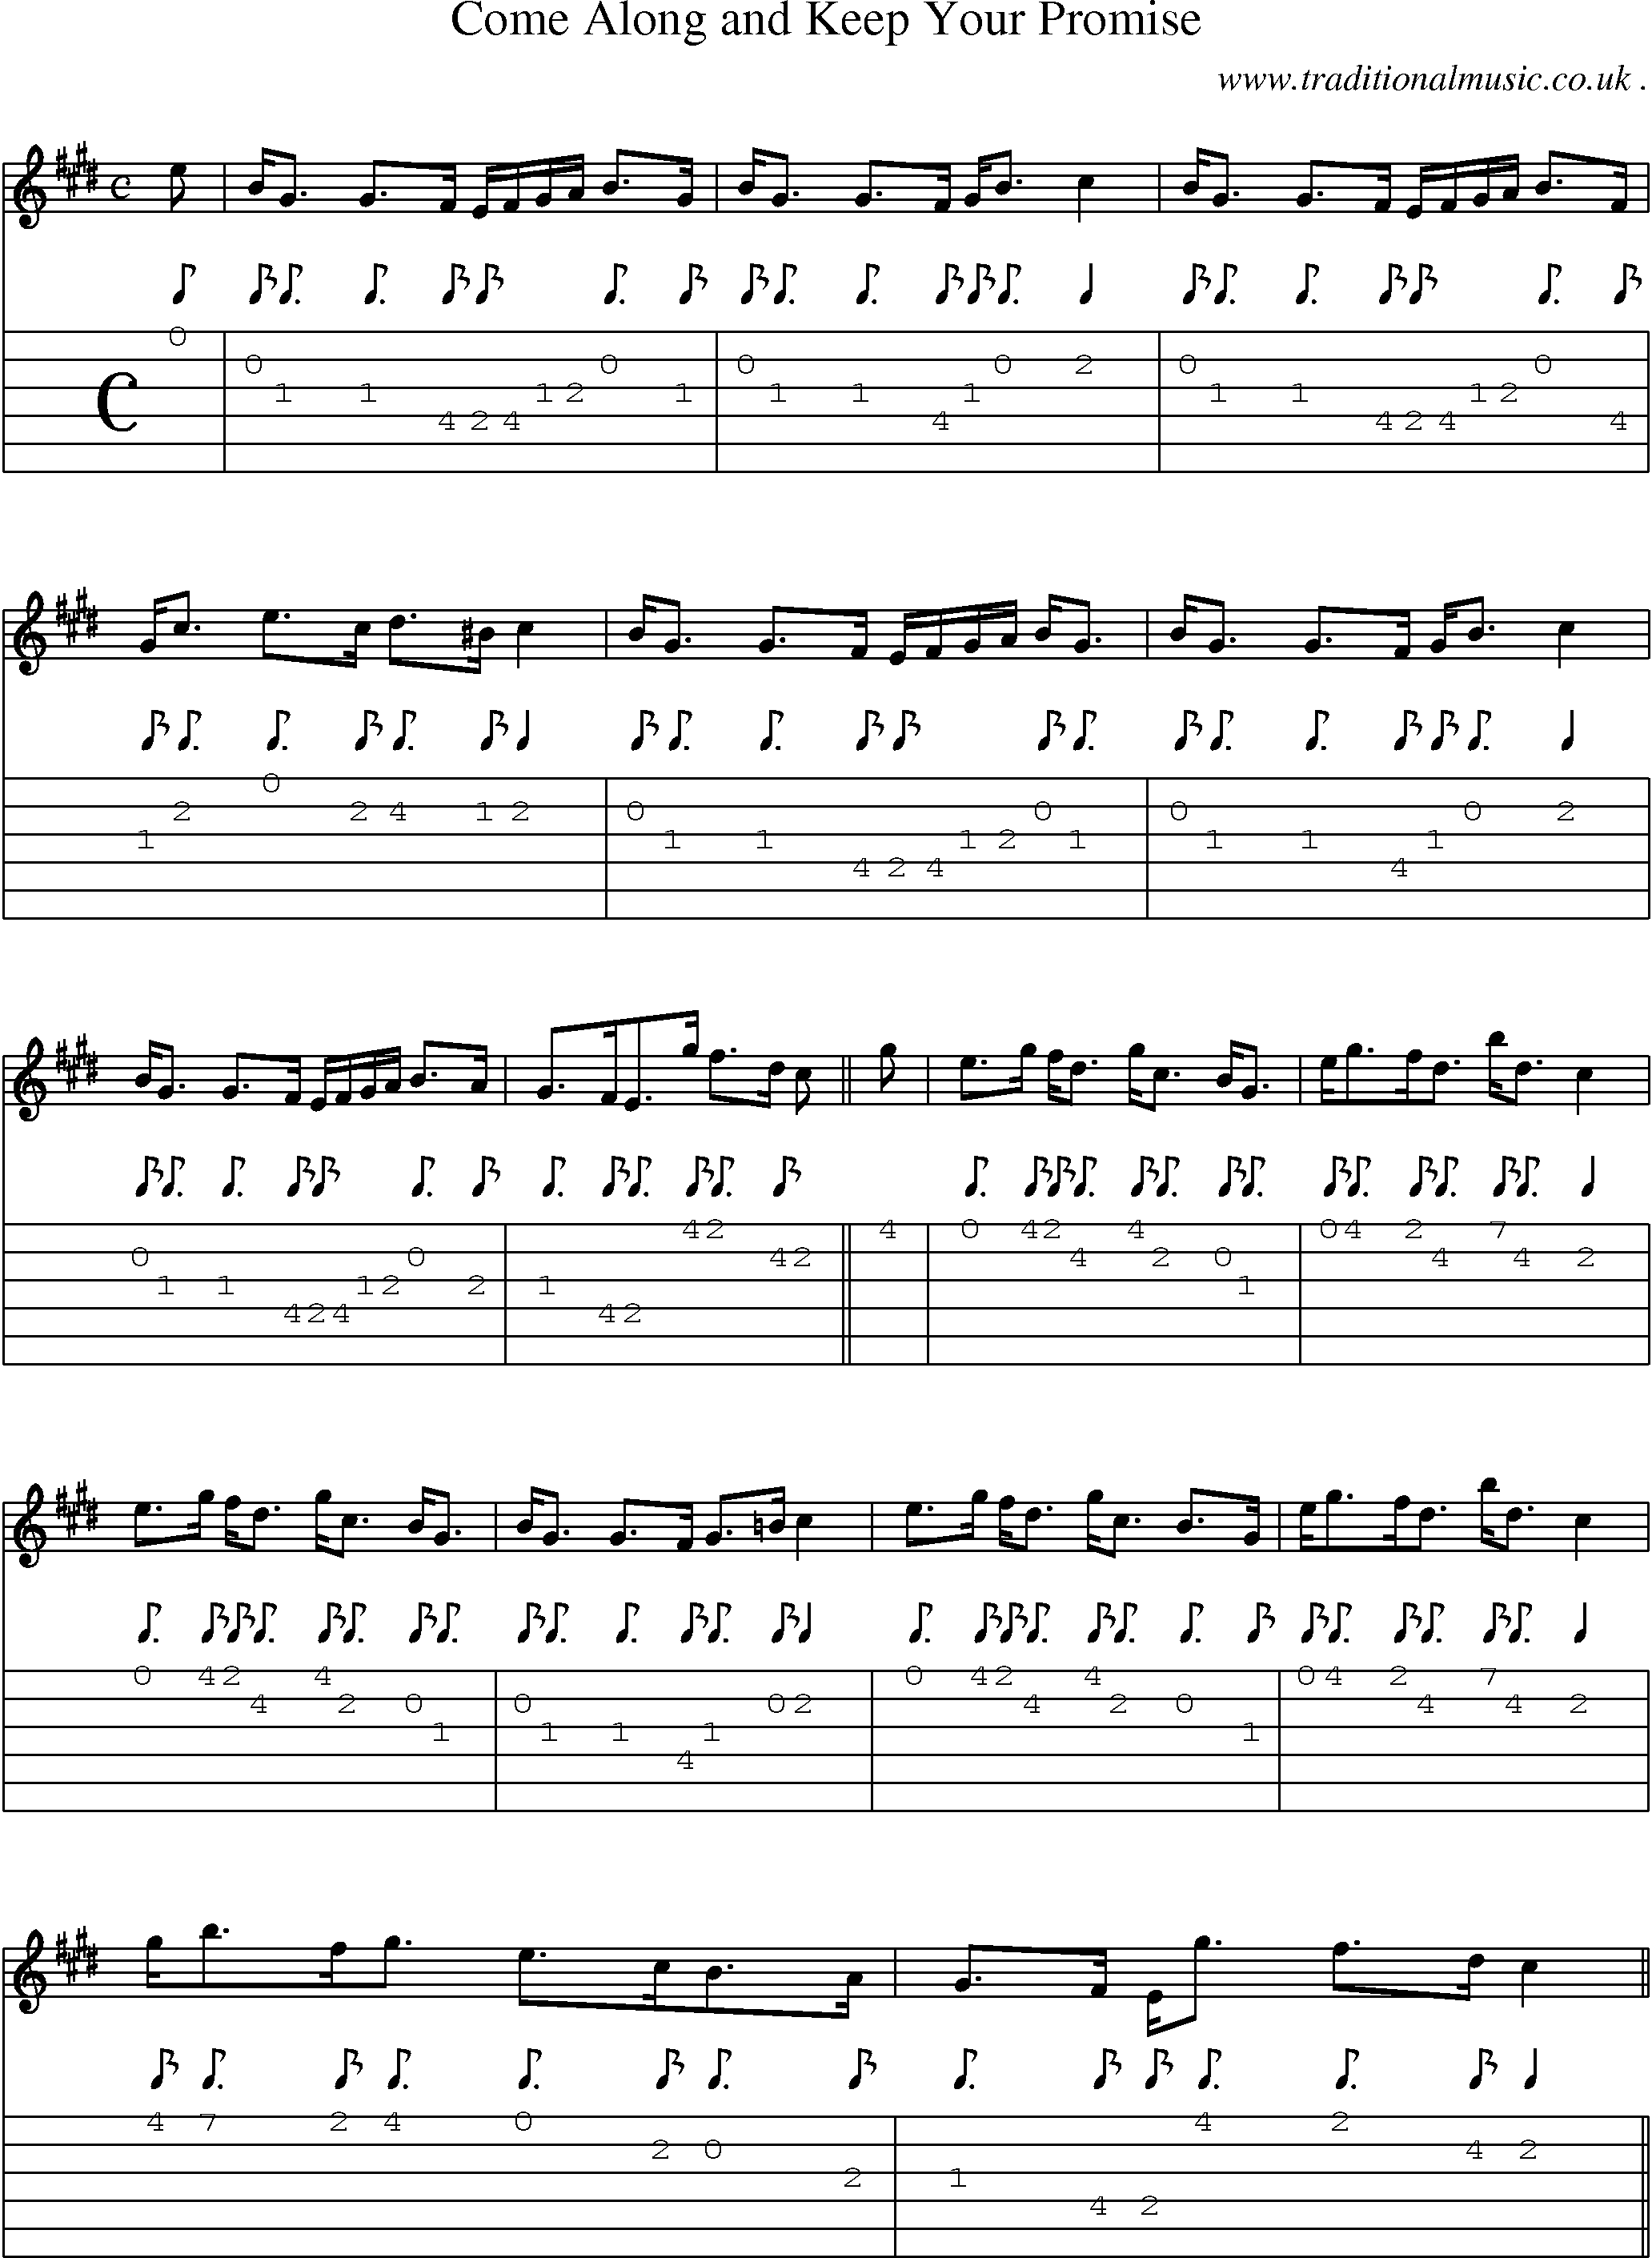 Sheet-music  score, Chords and Guitar Tabs for Come Along And Keep Your Promise